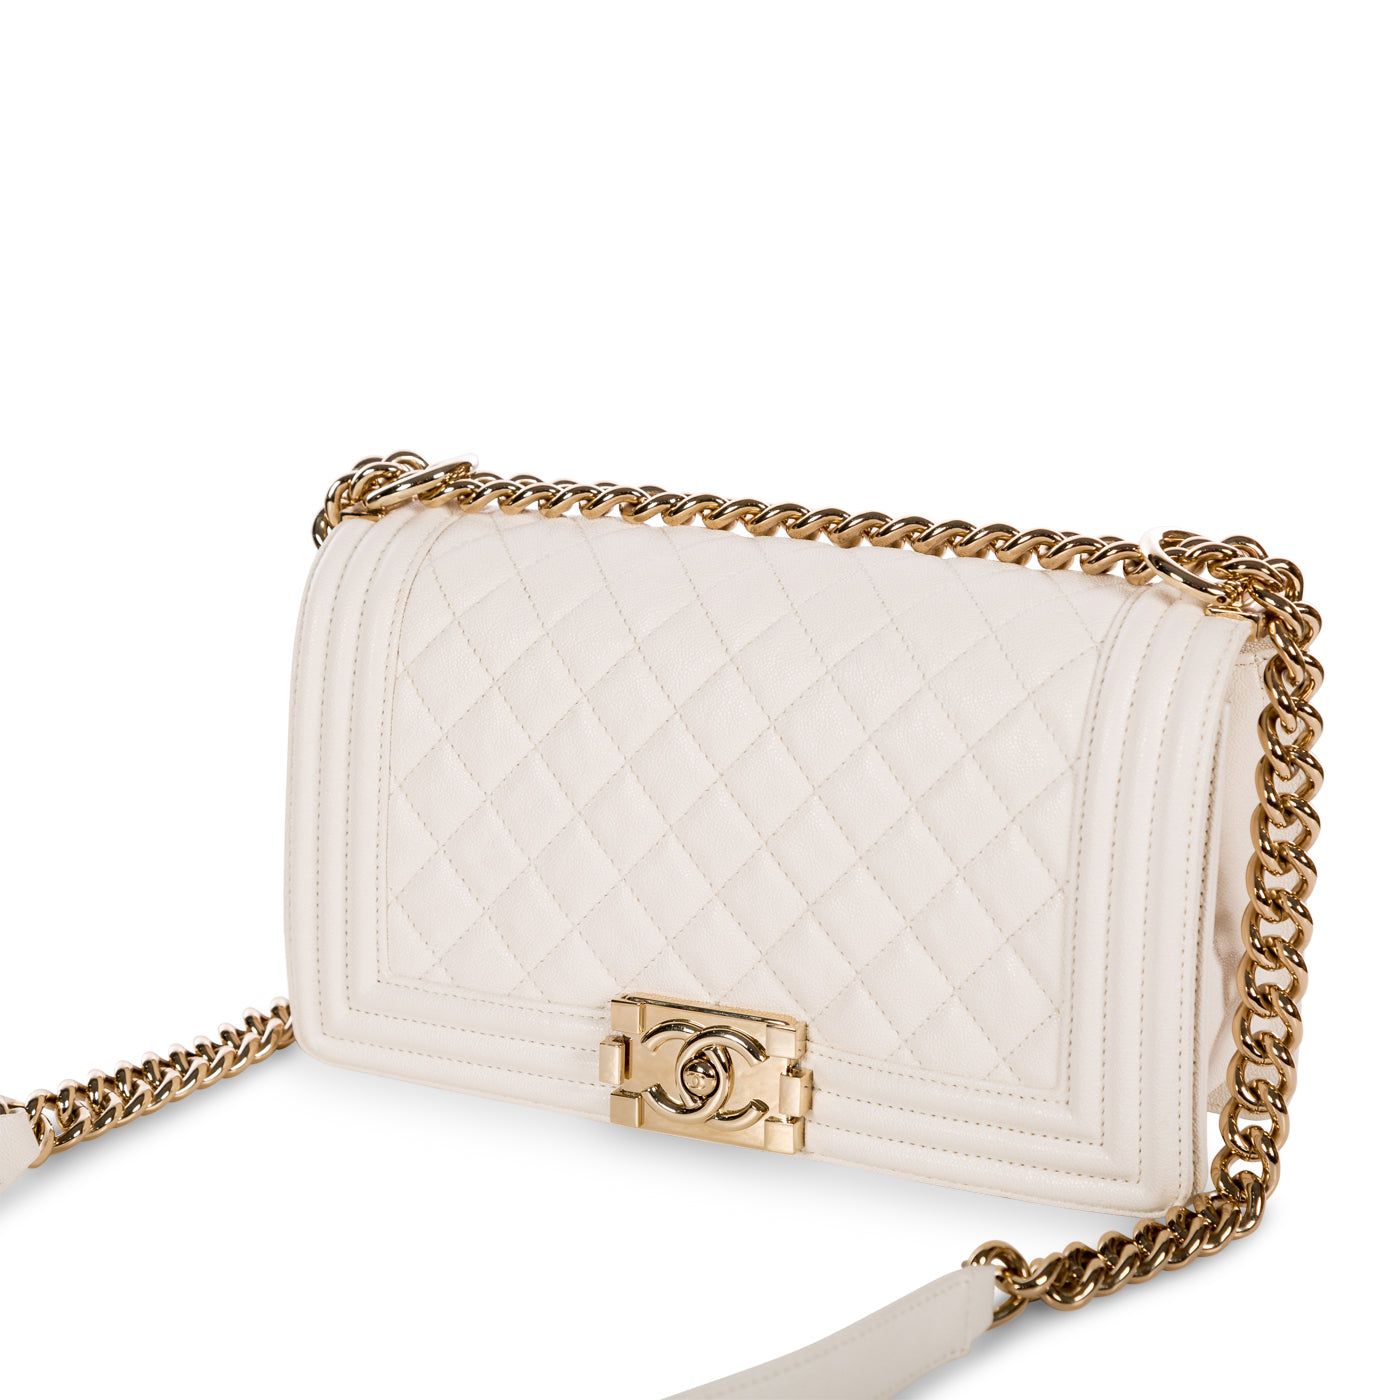 Chanel - Small Boy Bag - White Caviar Leather - CGHW - New